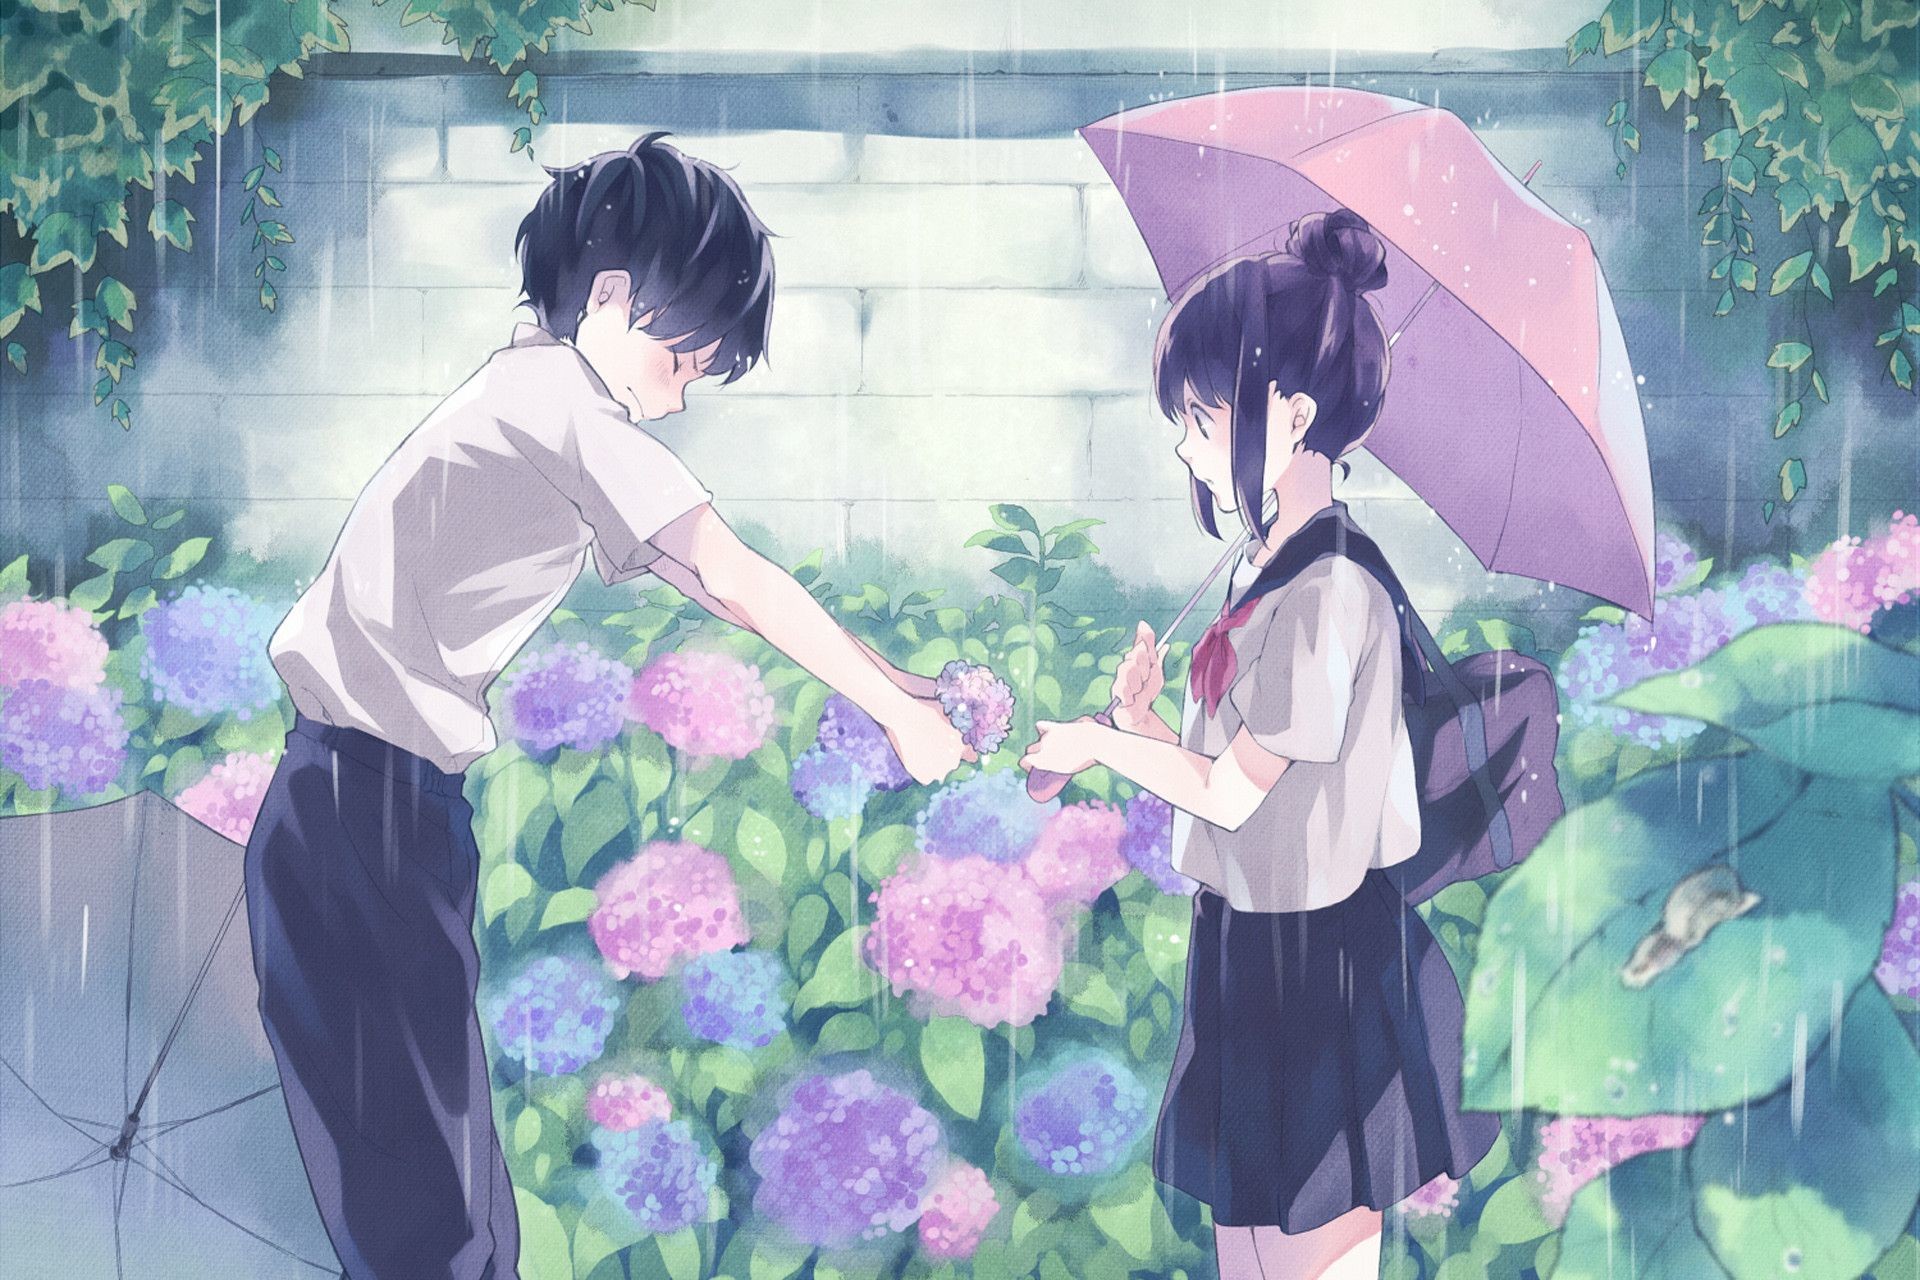 Boy & Girl in Love Anime Wallpapers - Anime Aesthetic Wallpapers